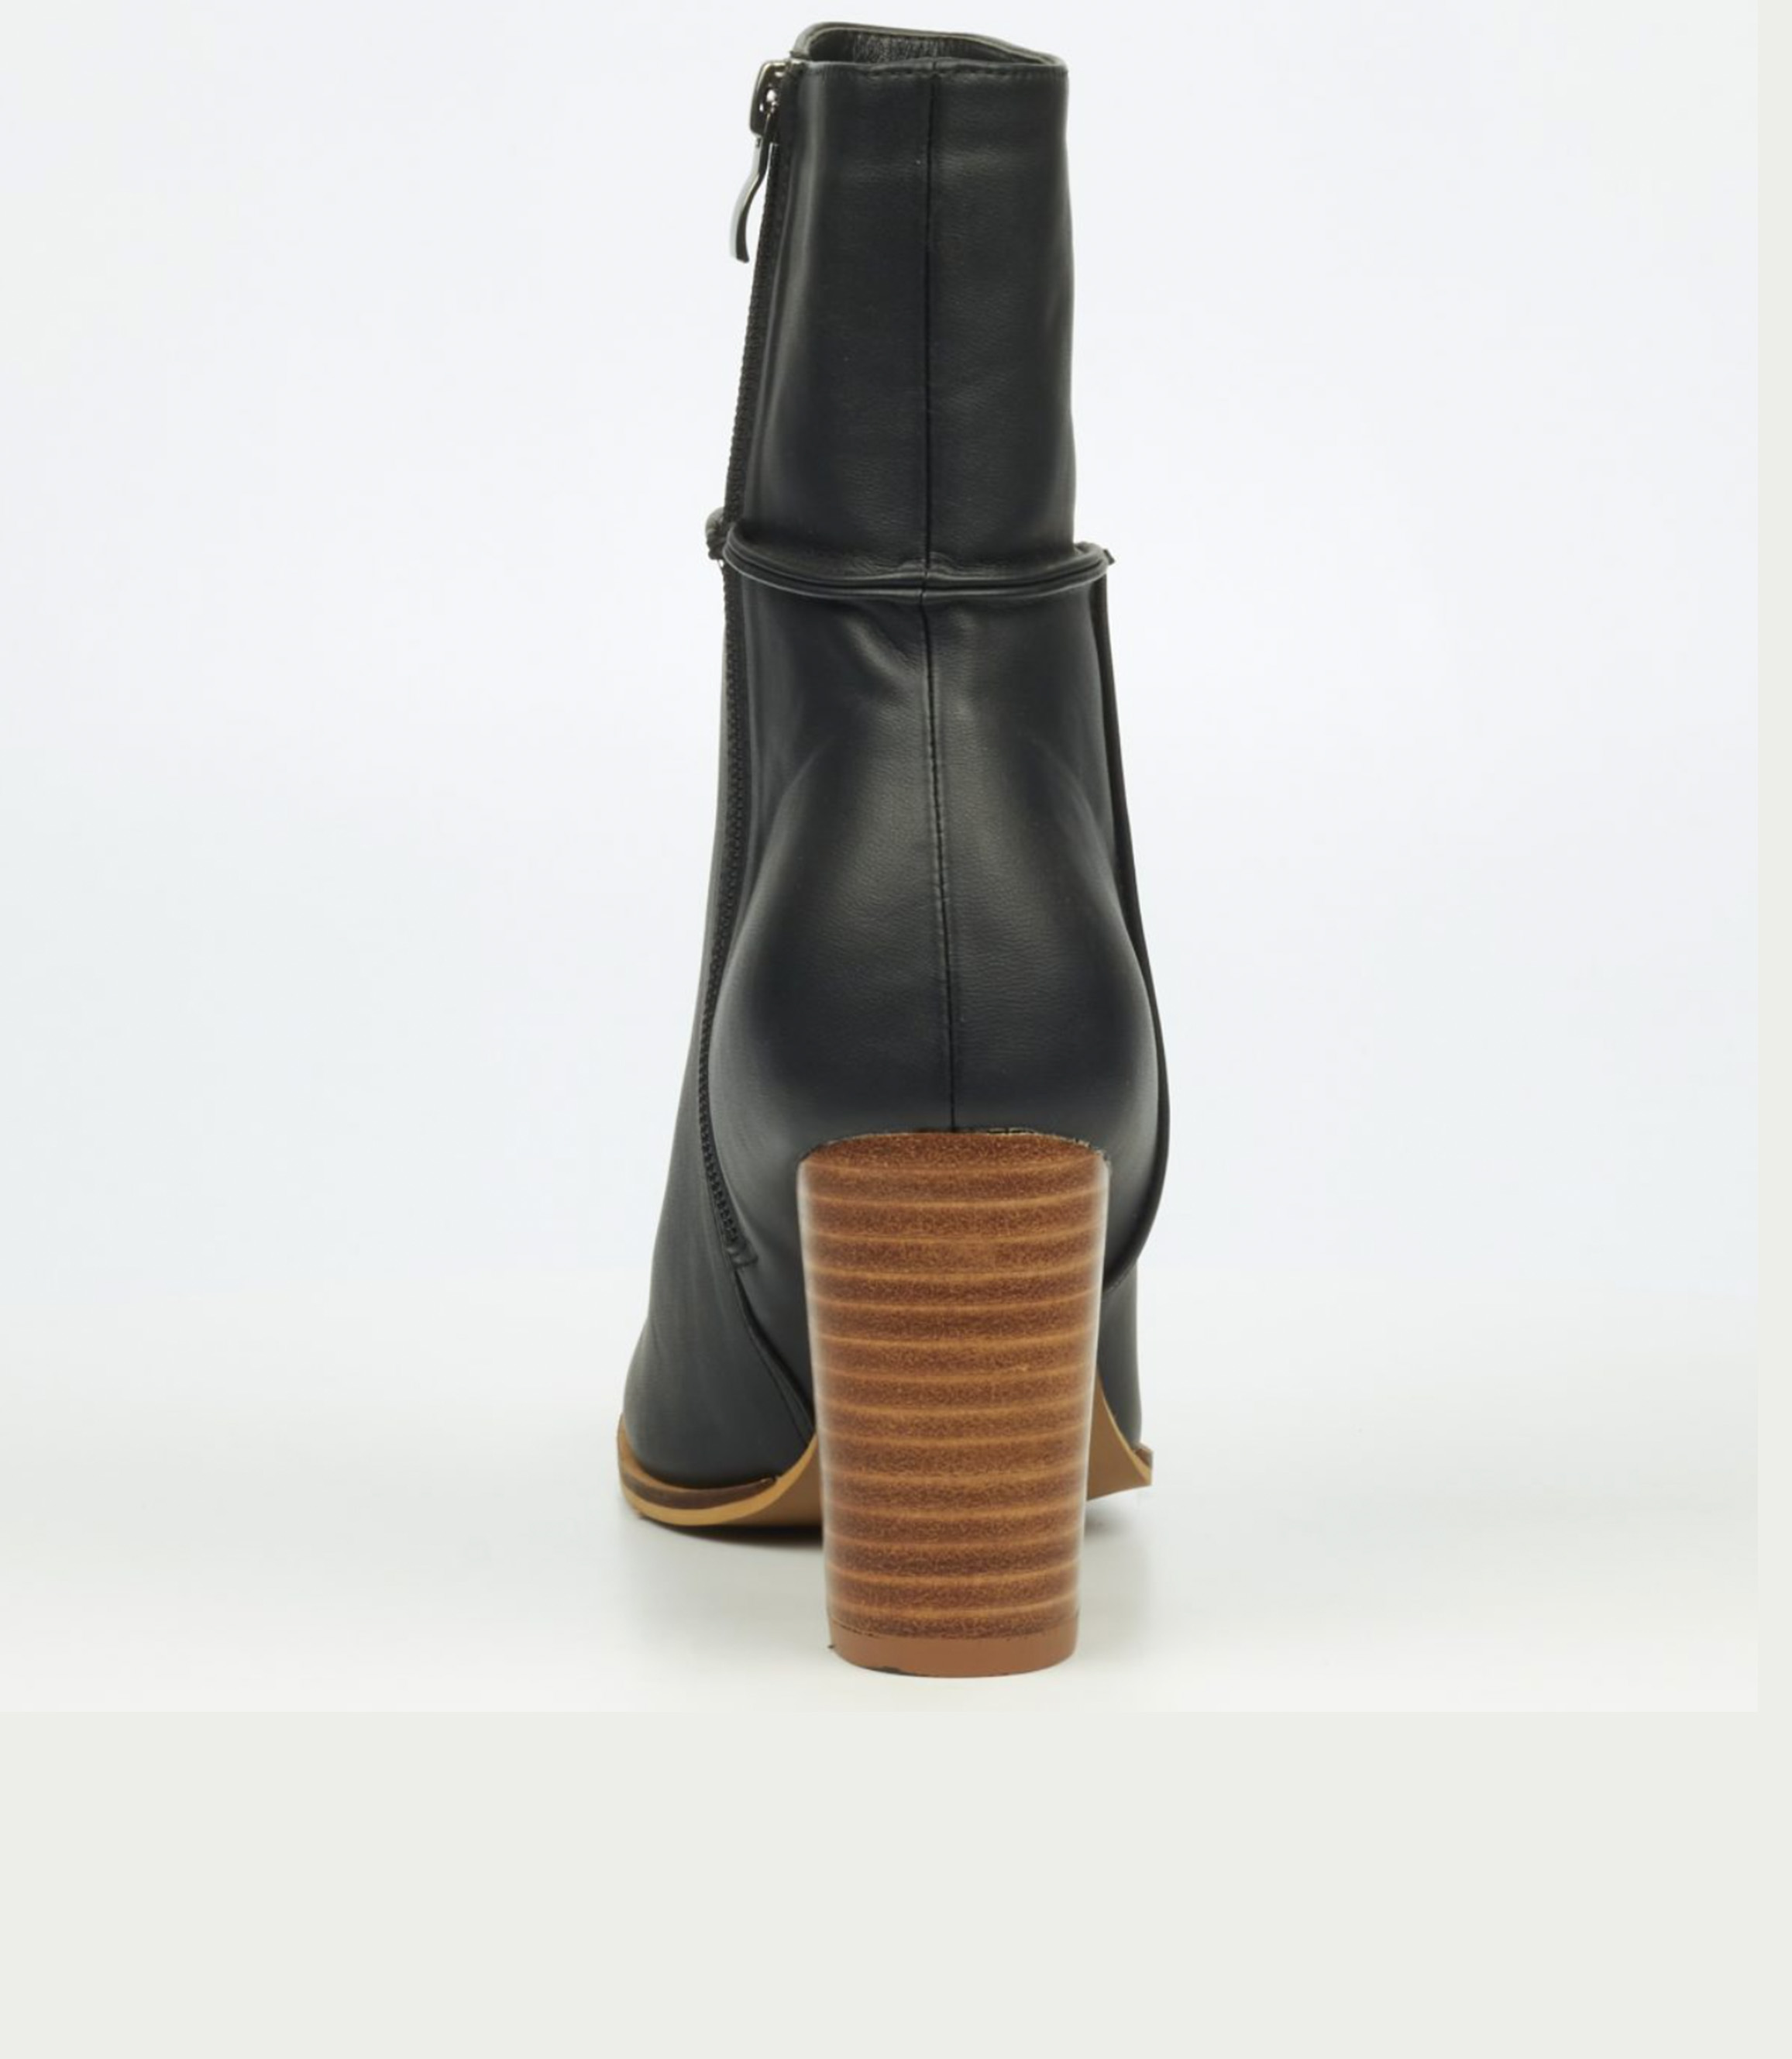 MISS BLACK RIA BLACK BOOTS | Rosella - Style inspired by elegance